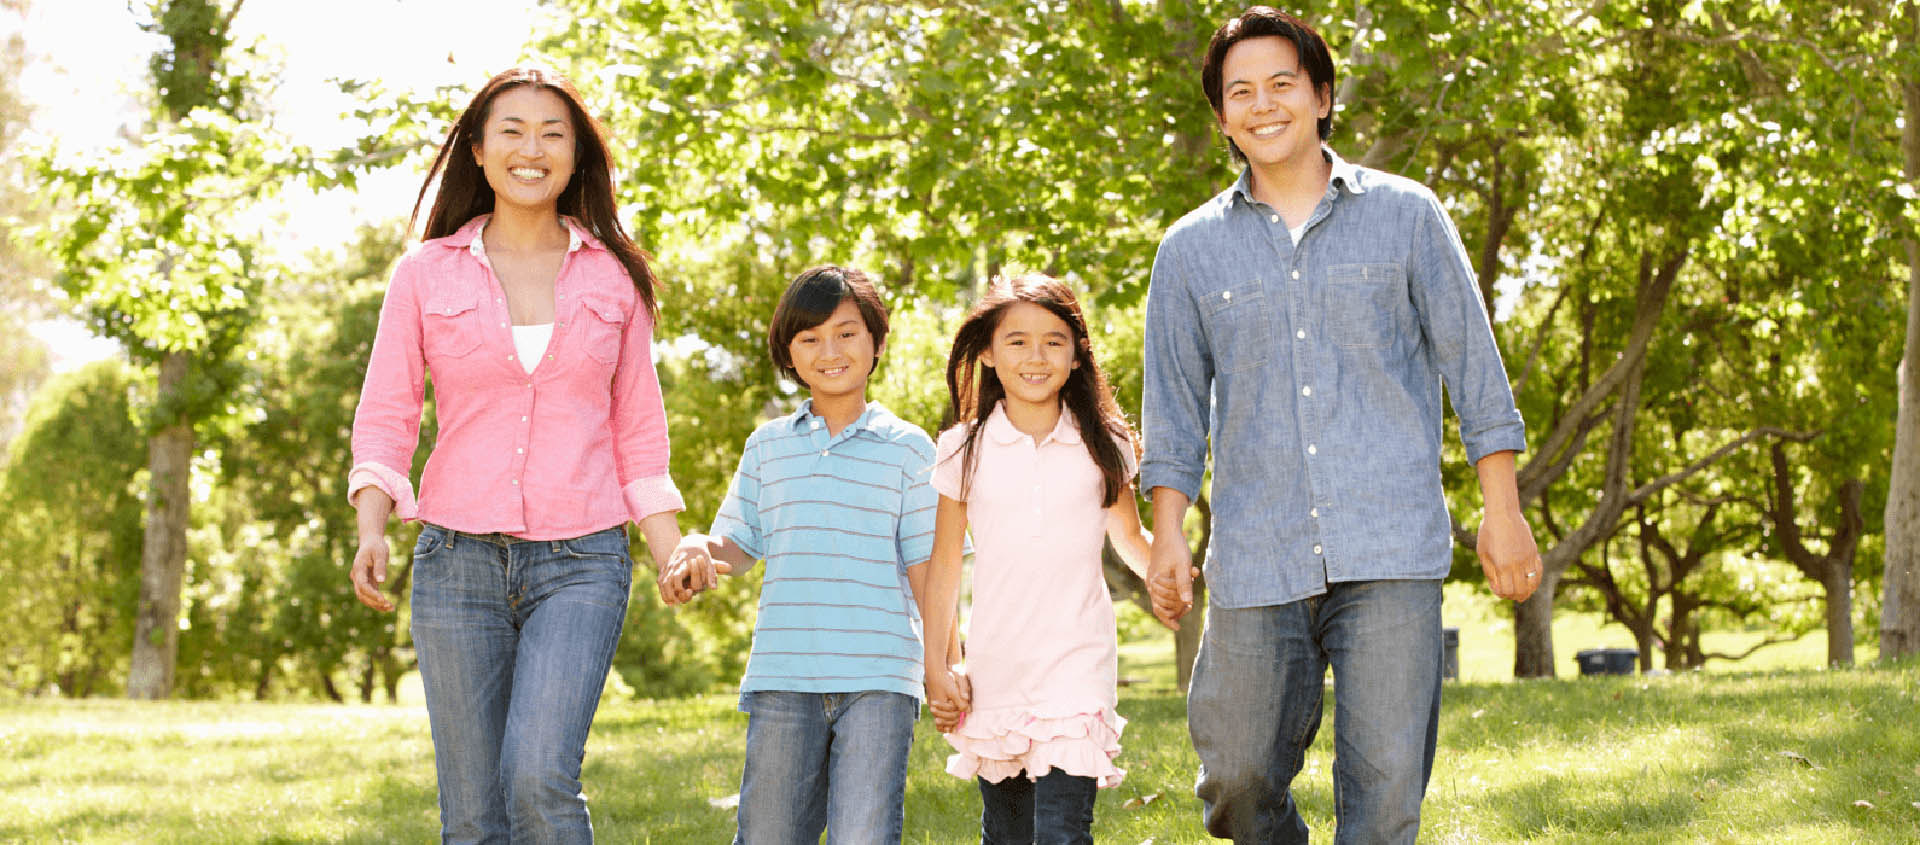 new-communities-best-choice-families-featured-image